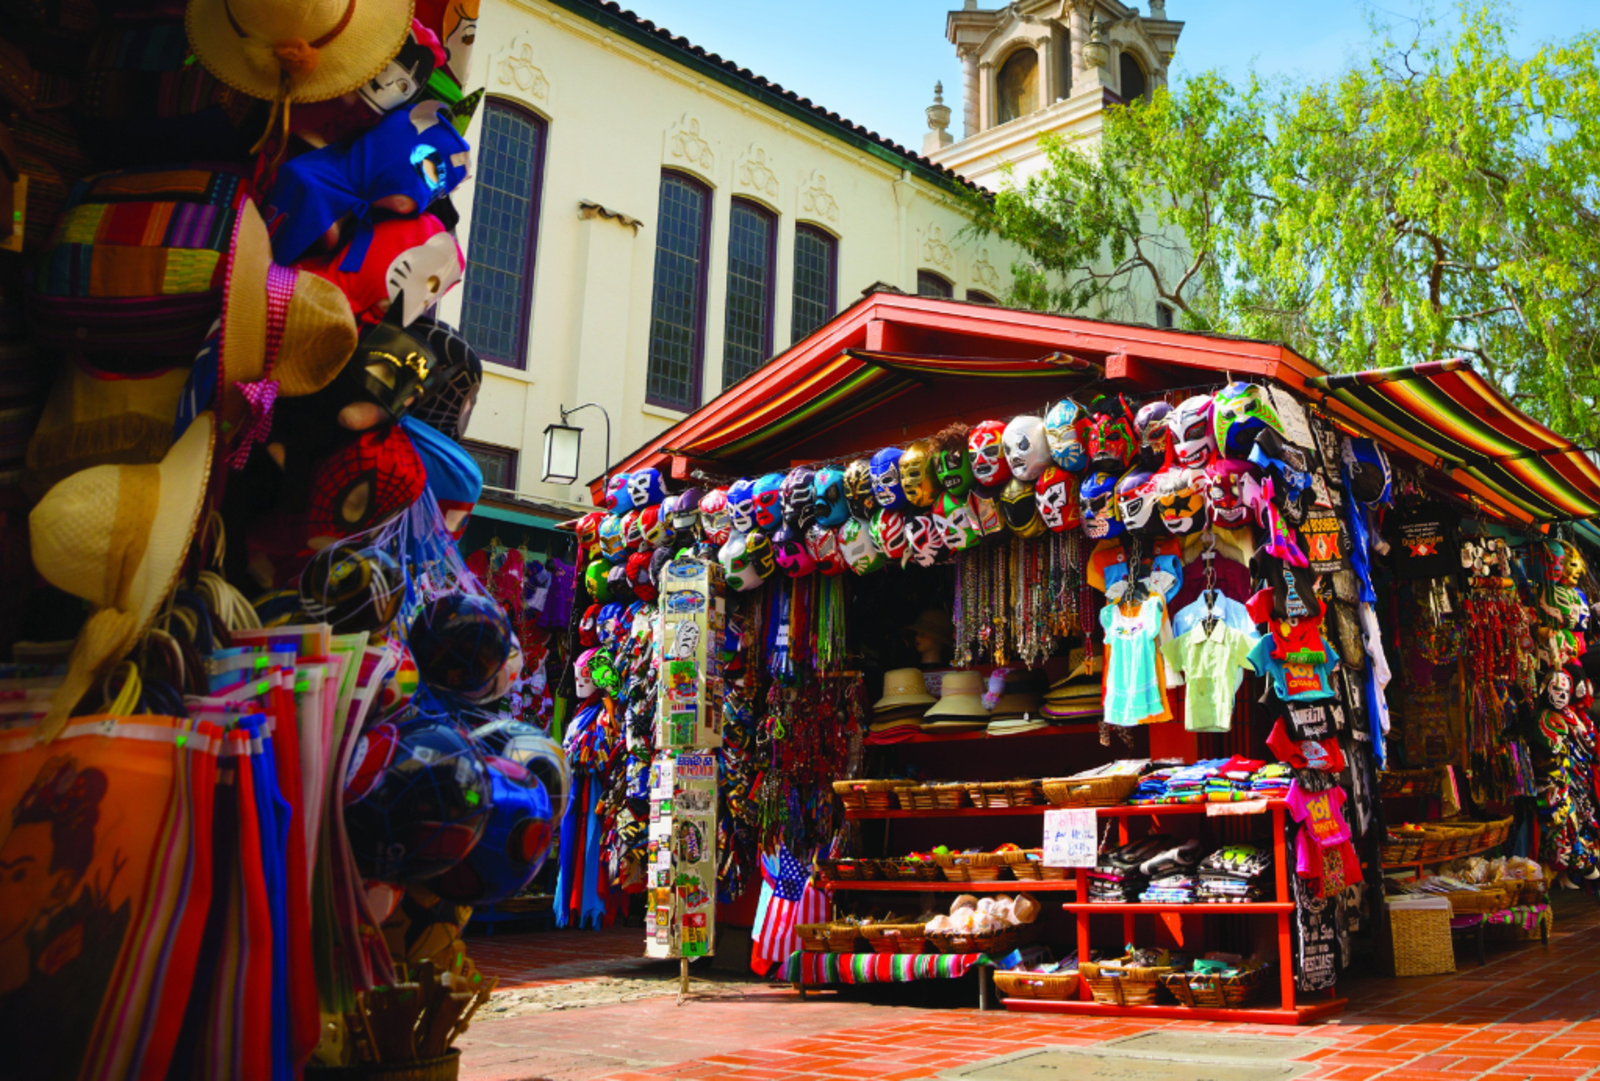 Bright masks for sale at an outdoor stall on Olvera Street